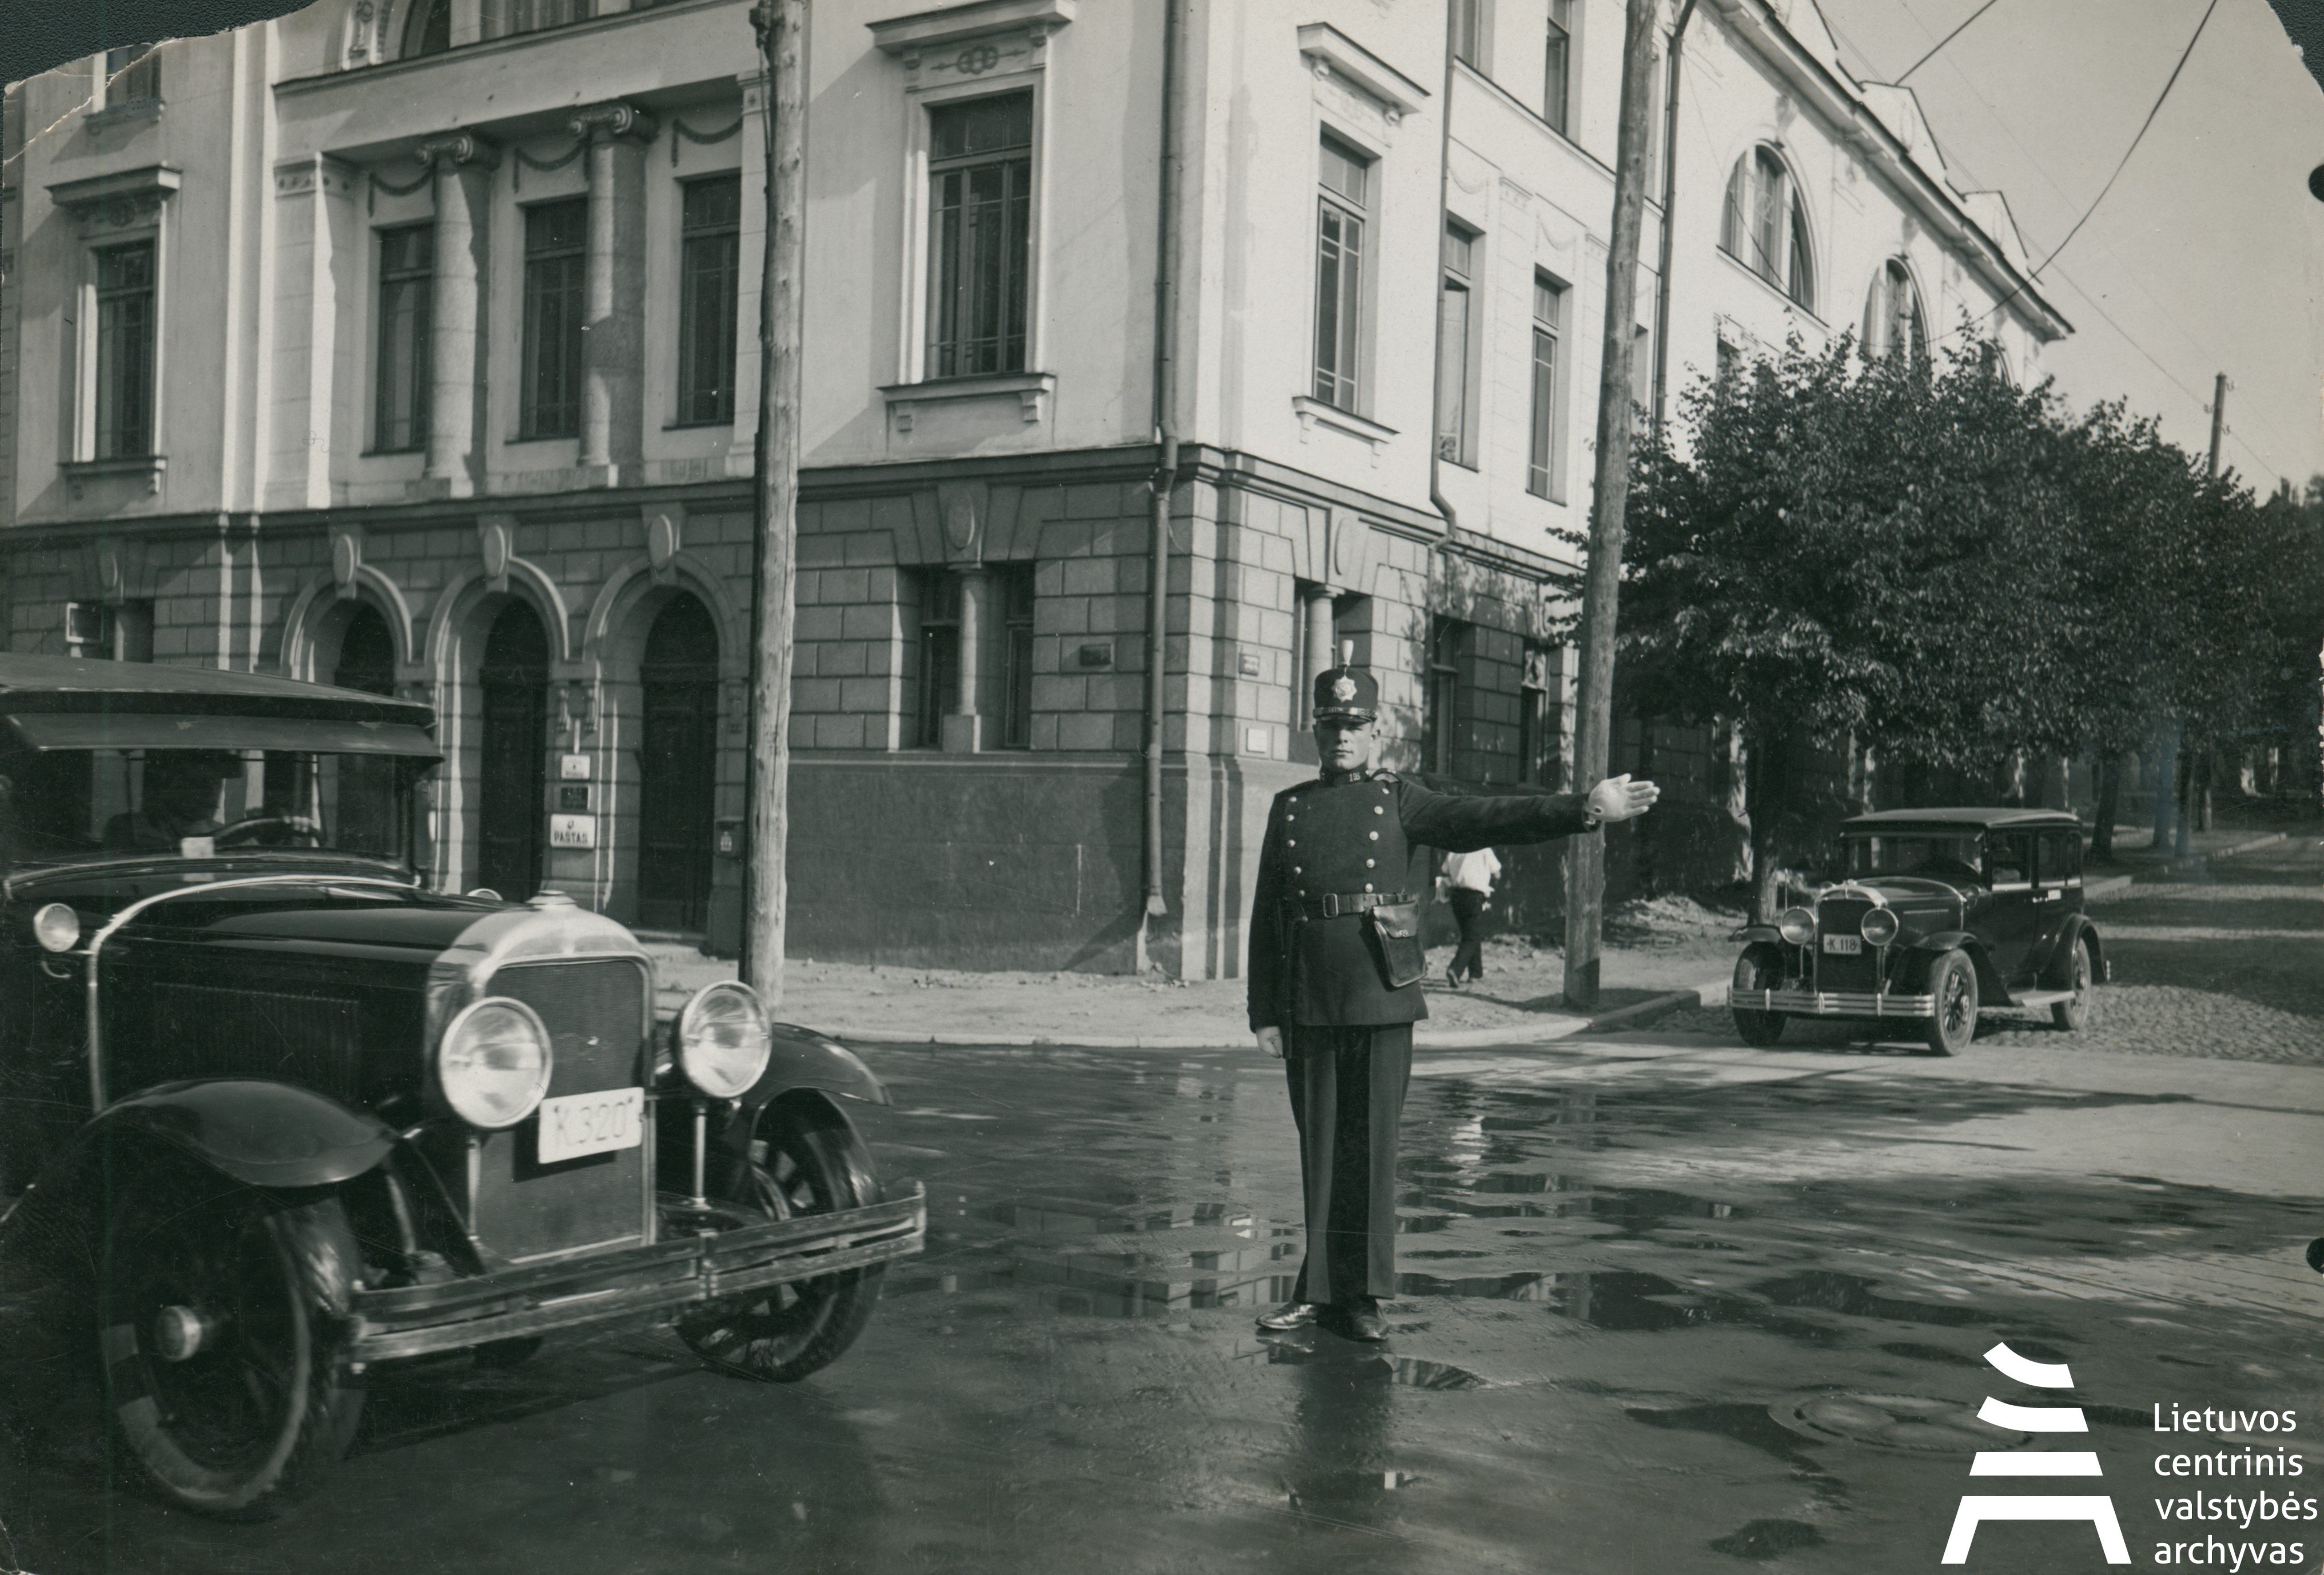 Lithuanian Central State Archives, A police officer regulating traffic on the crossroad of Donelaitis and Maironis street next to Lithuanian ministry of Finance. Kaunas, Lithuania, 1920-1940